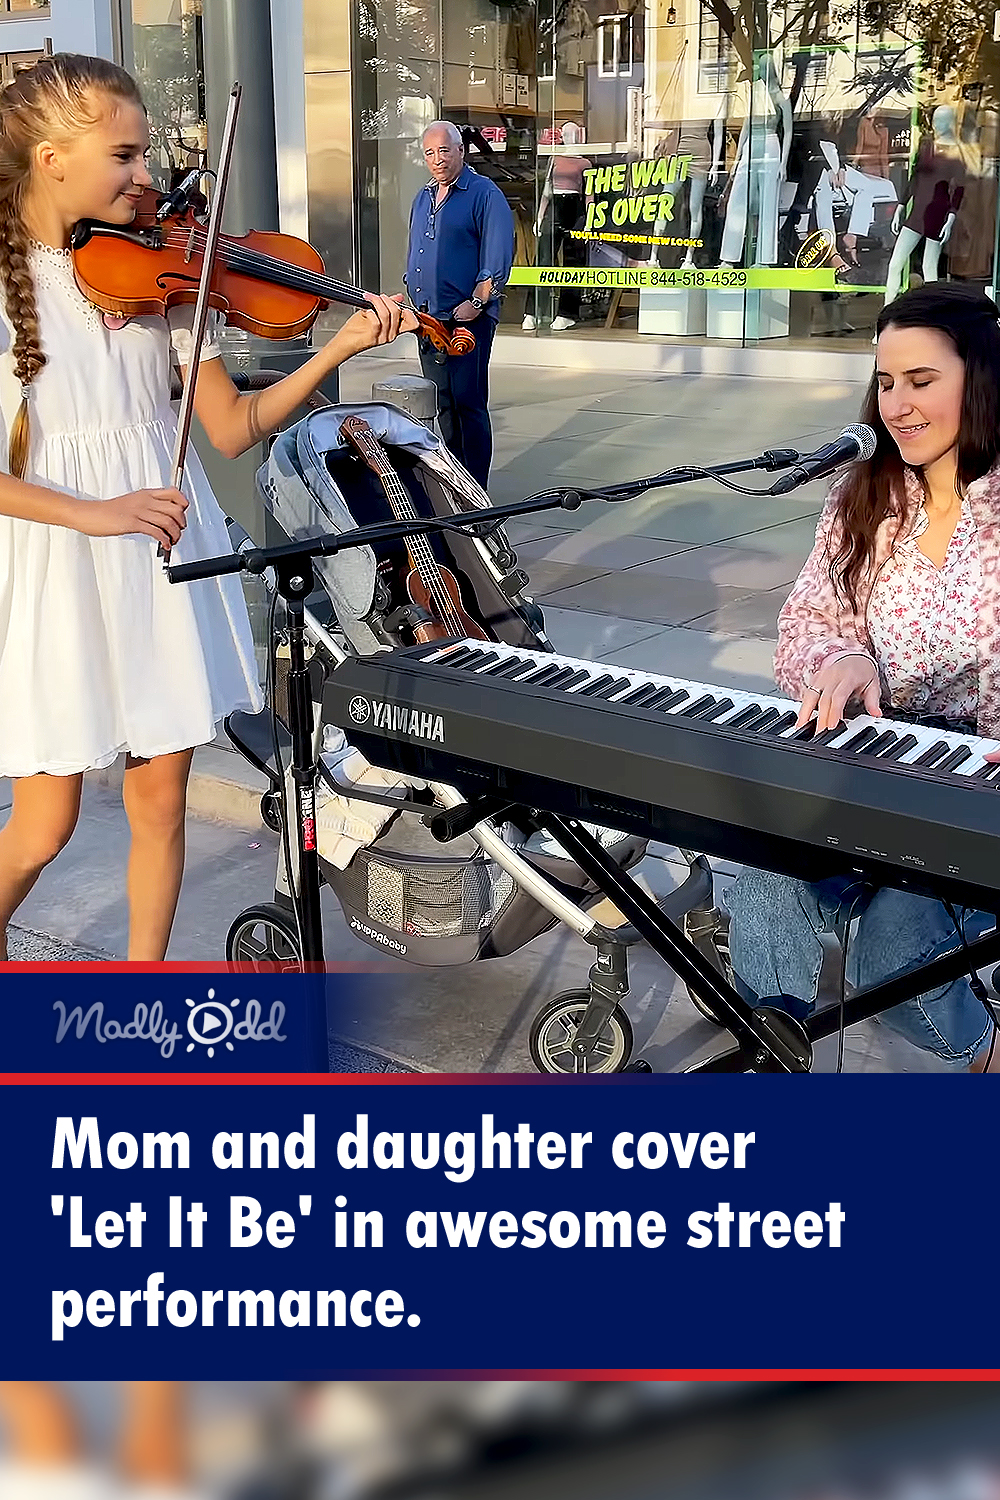 Mom and daughter cover \'Let It Be\' in awesome street performance